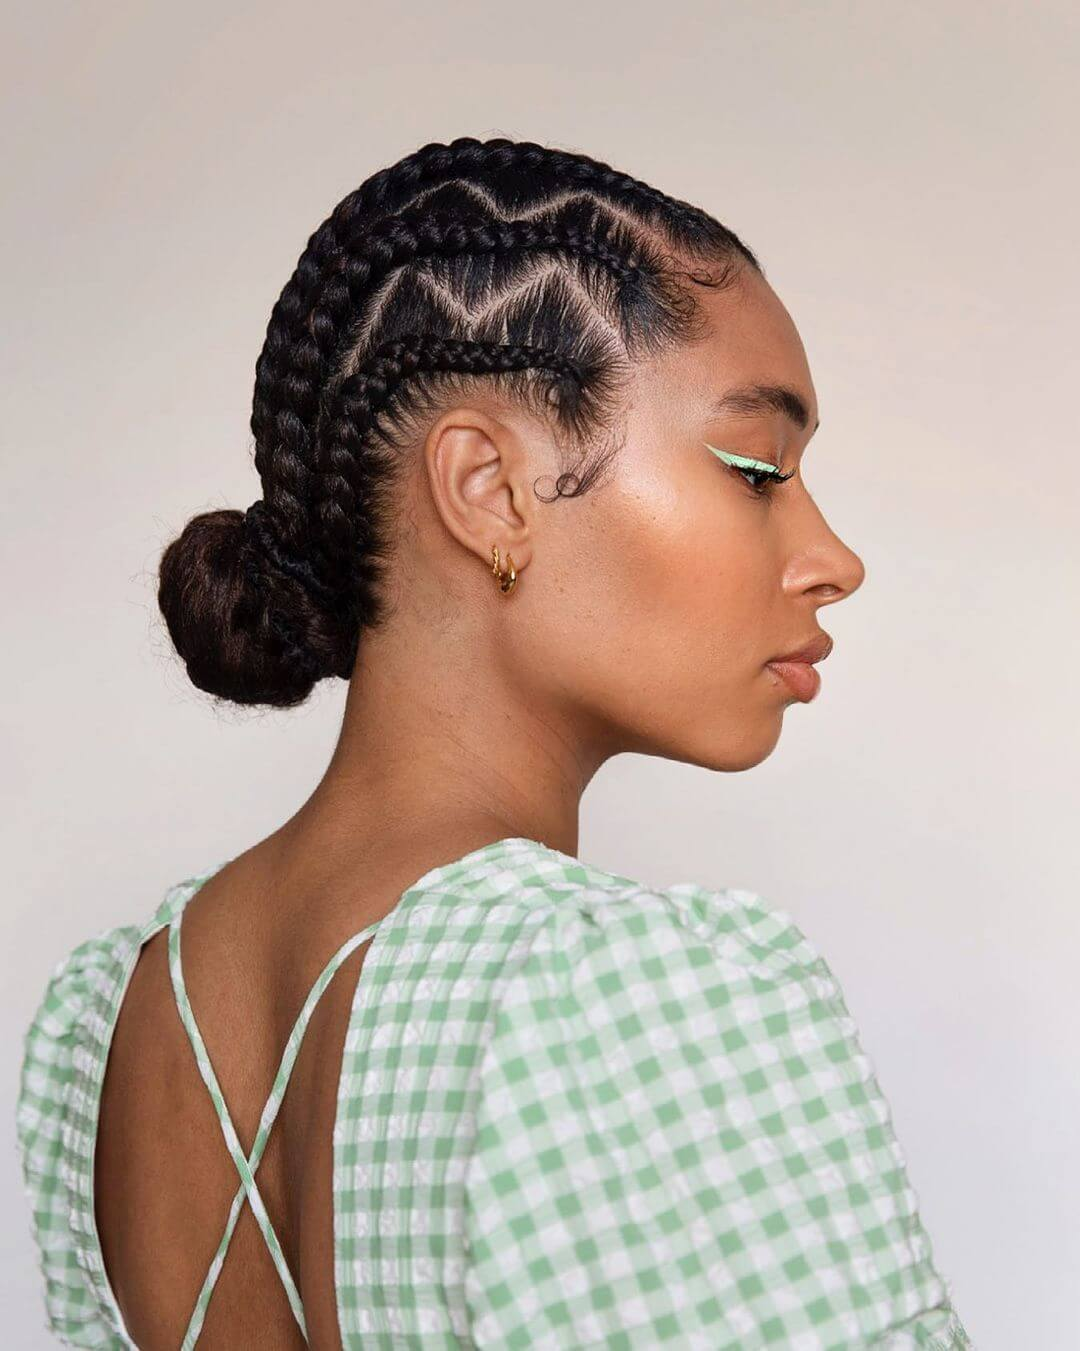 Get an elegant look with the braided side bun
